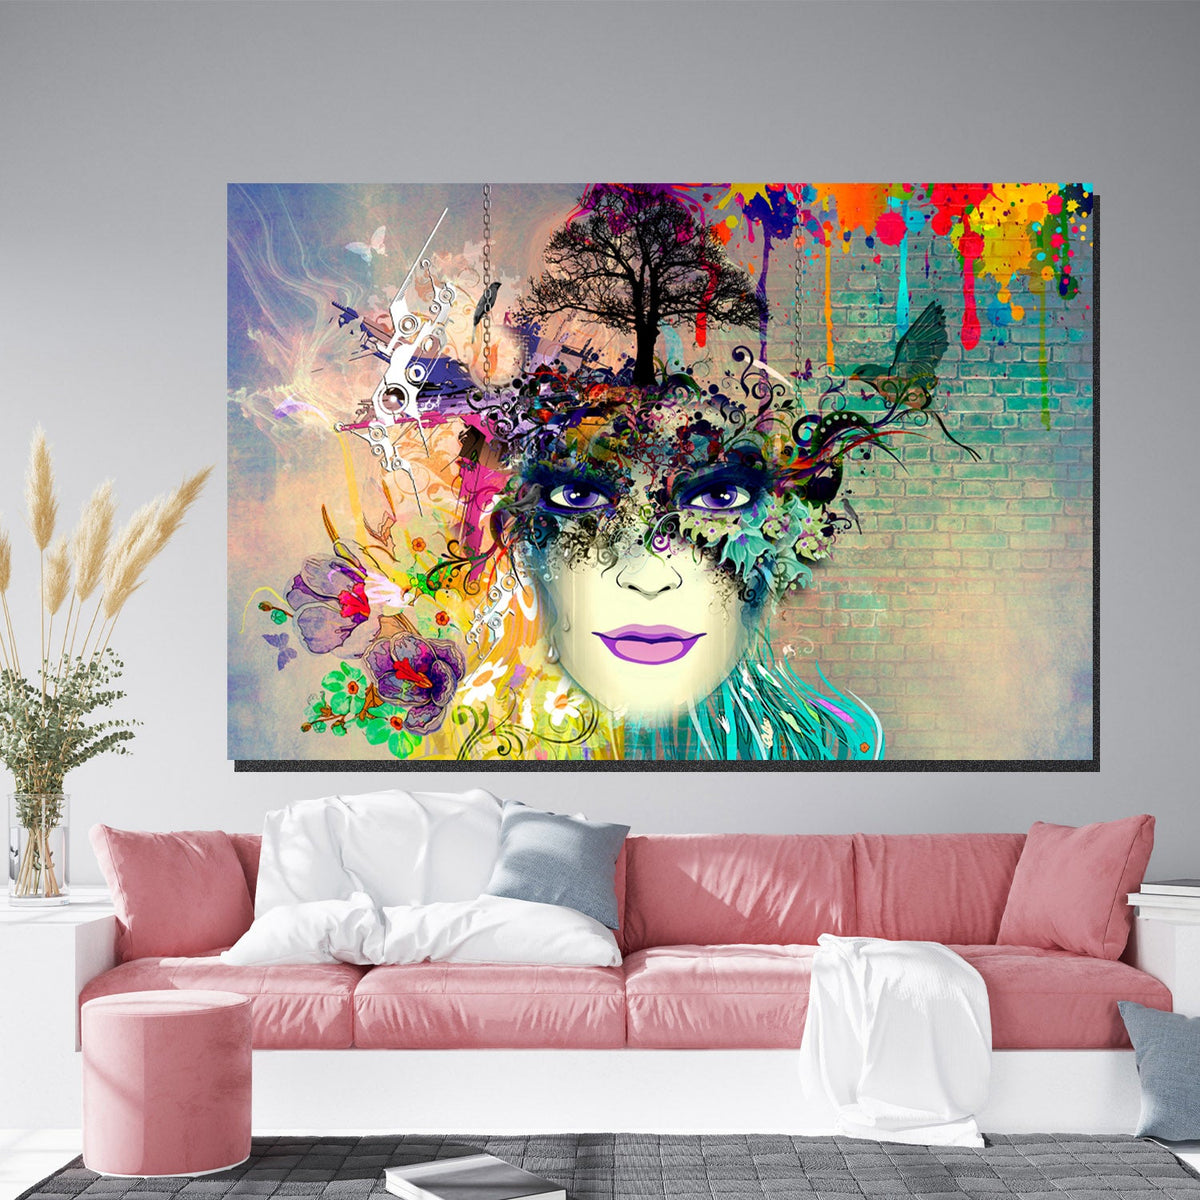 https://cdn.shopify.com/s/files/1/0387/9986/8044/products/AbstractPortraitofaWomanCanvasArtPrintStretched-3.jpg